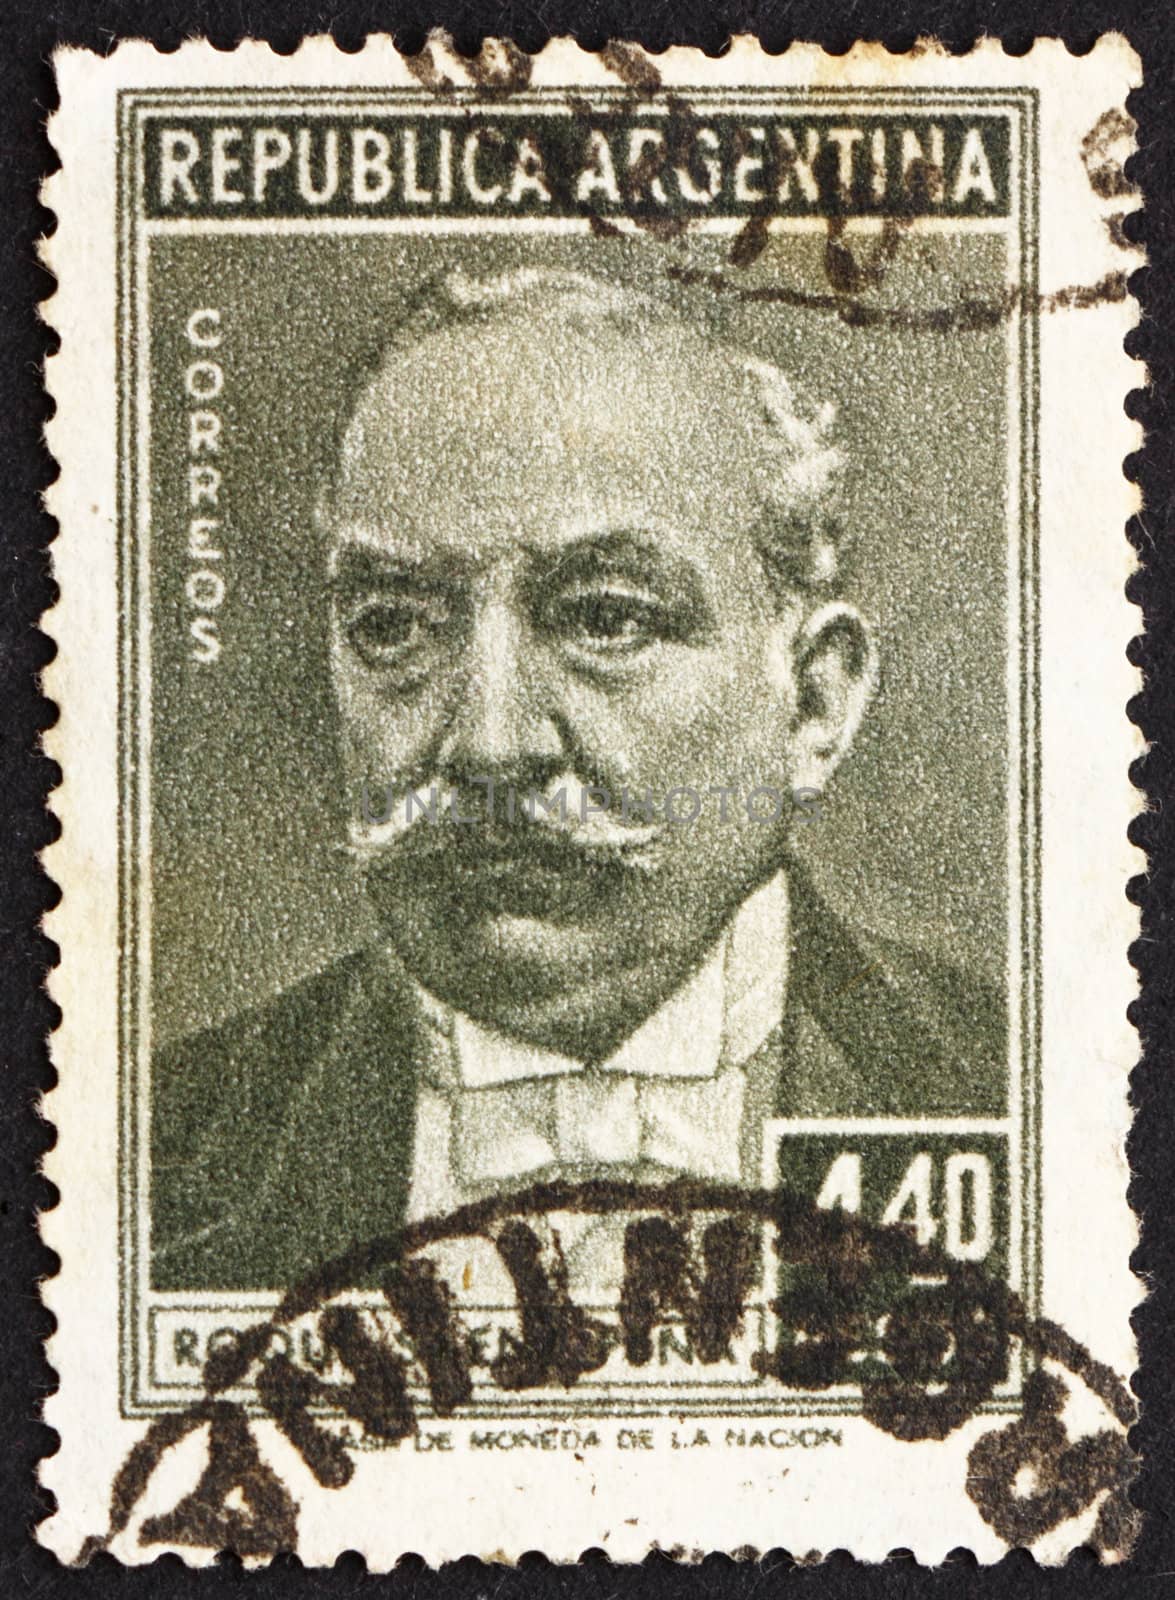 ARGENTINA - CIRCA 1957: a stamp printed in the Argentina shows Roque Saenz Pena Lahite, President of Argentina, 1910 - 1914, circa 1957